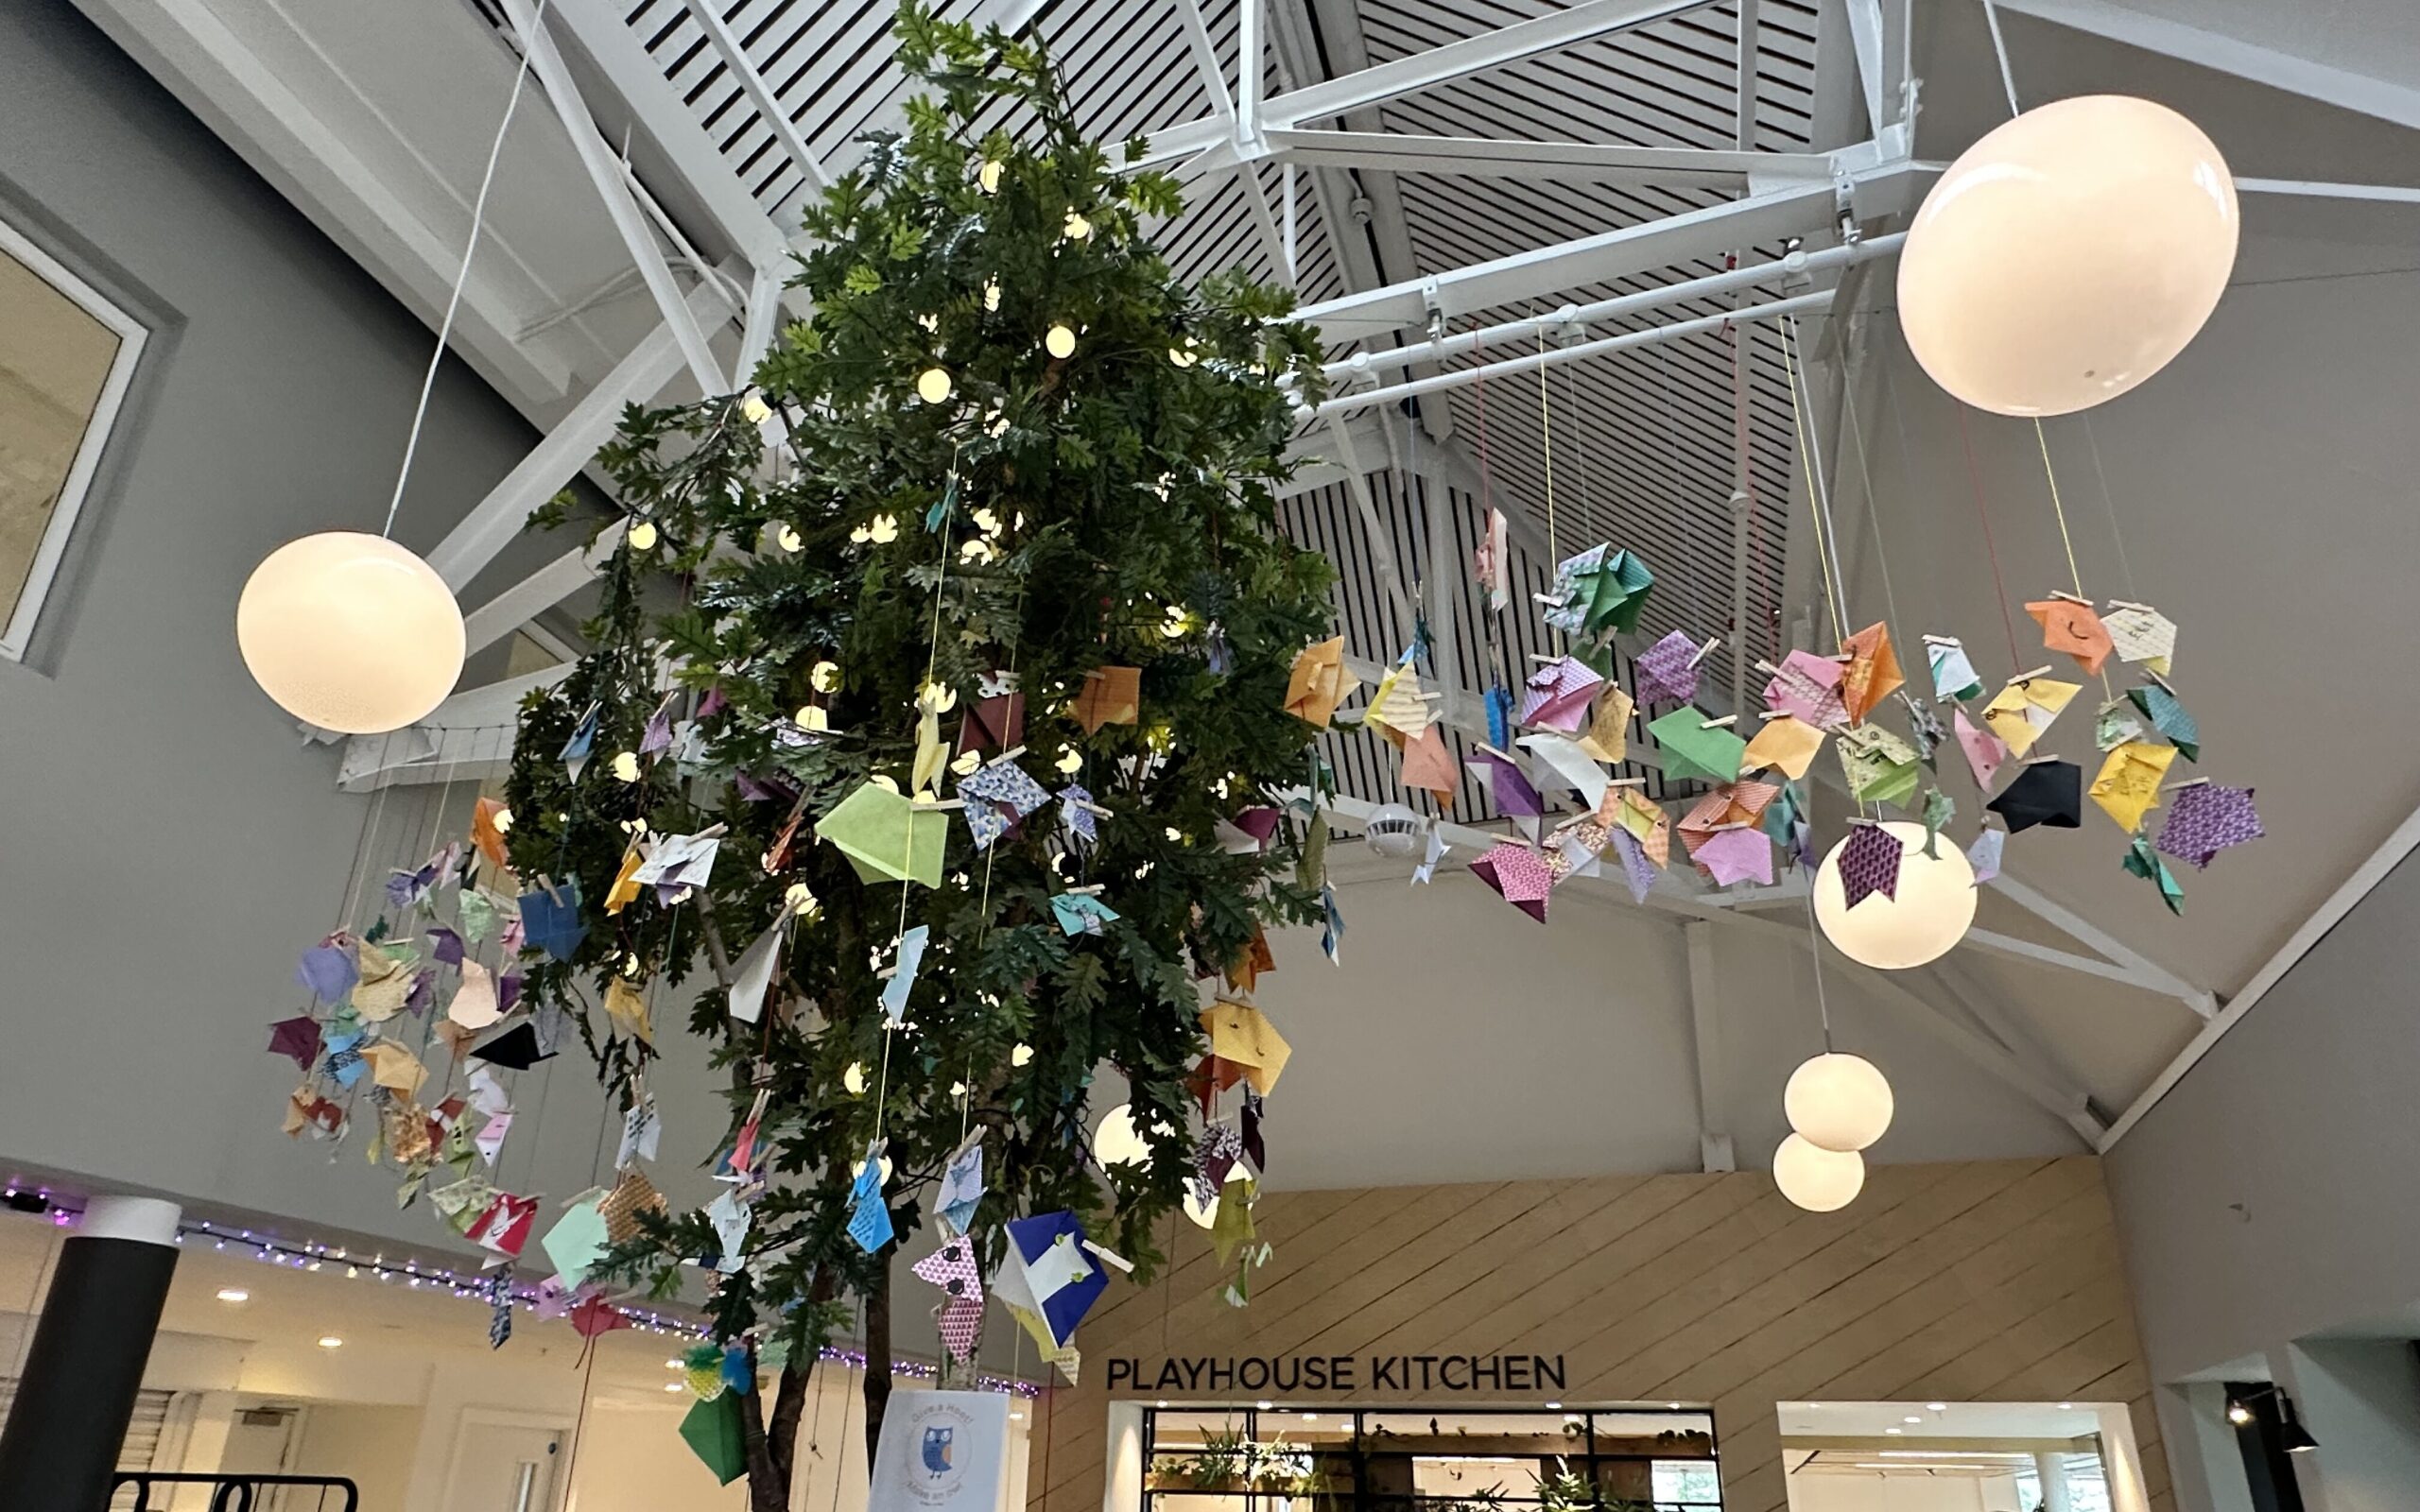 The owls took over in the Playhouse Kitchen café! Our Wish Tree had lots of origami owls in bright colours dangling and there were more hanging from the rafters.